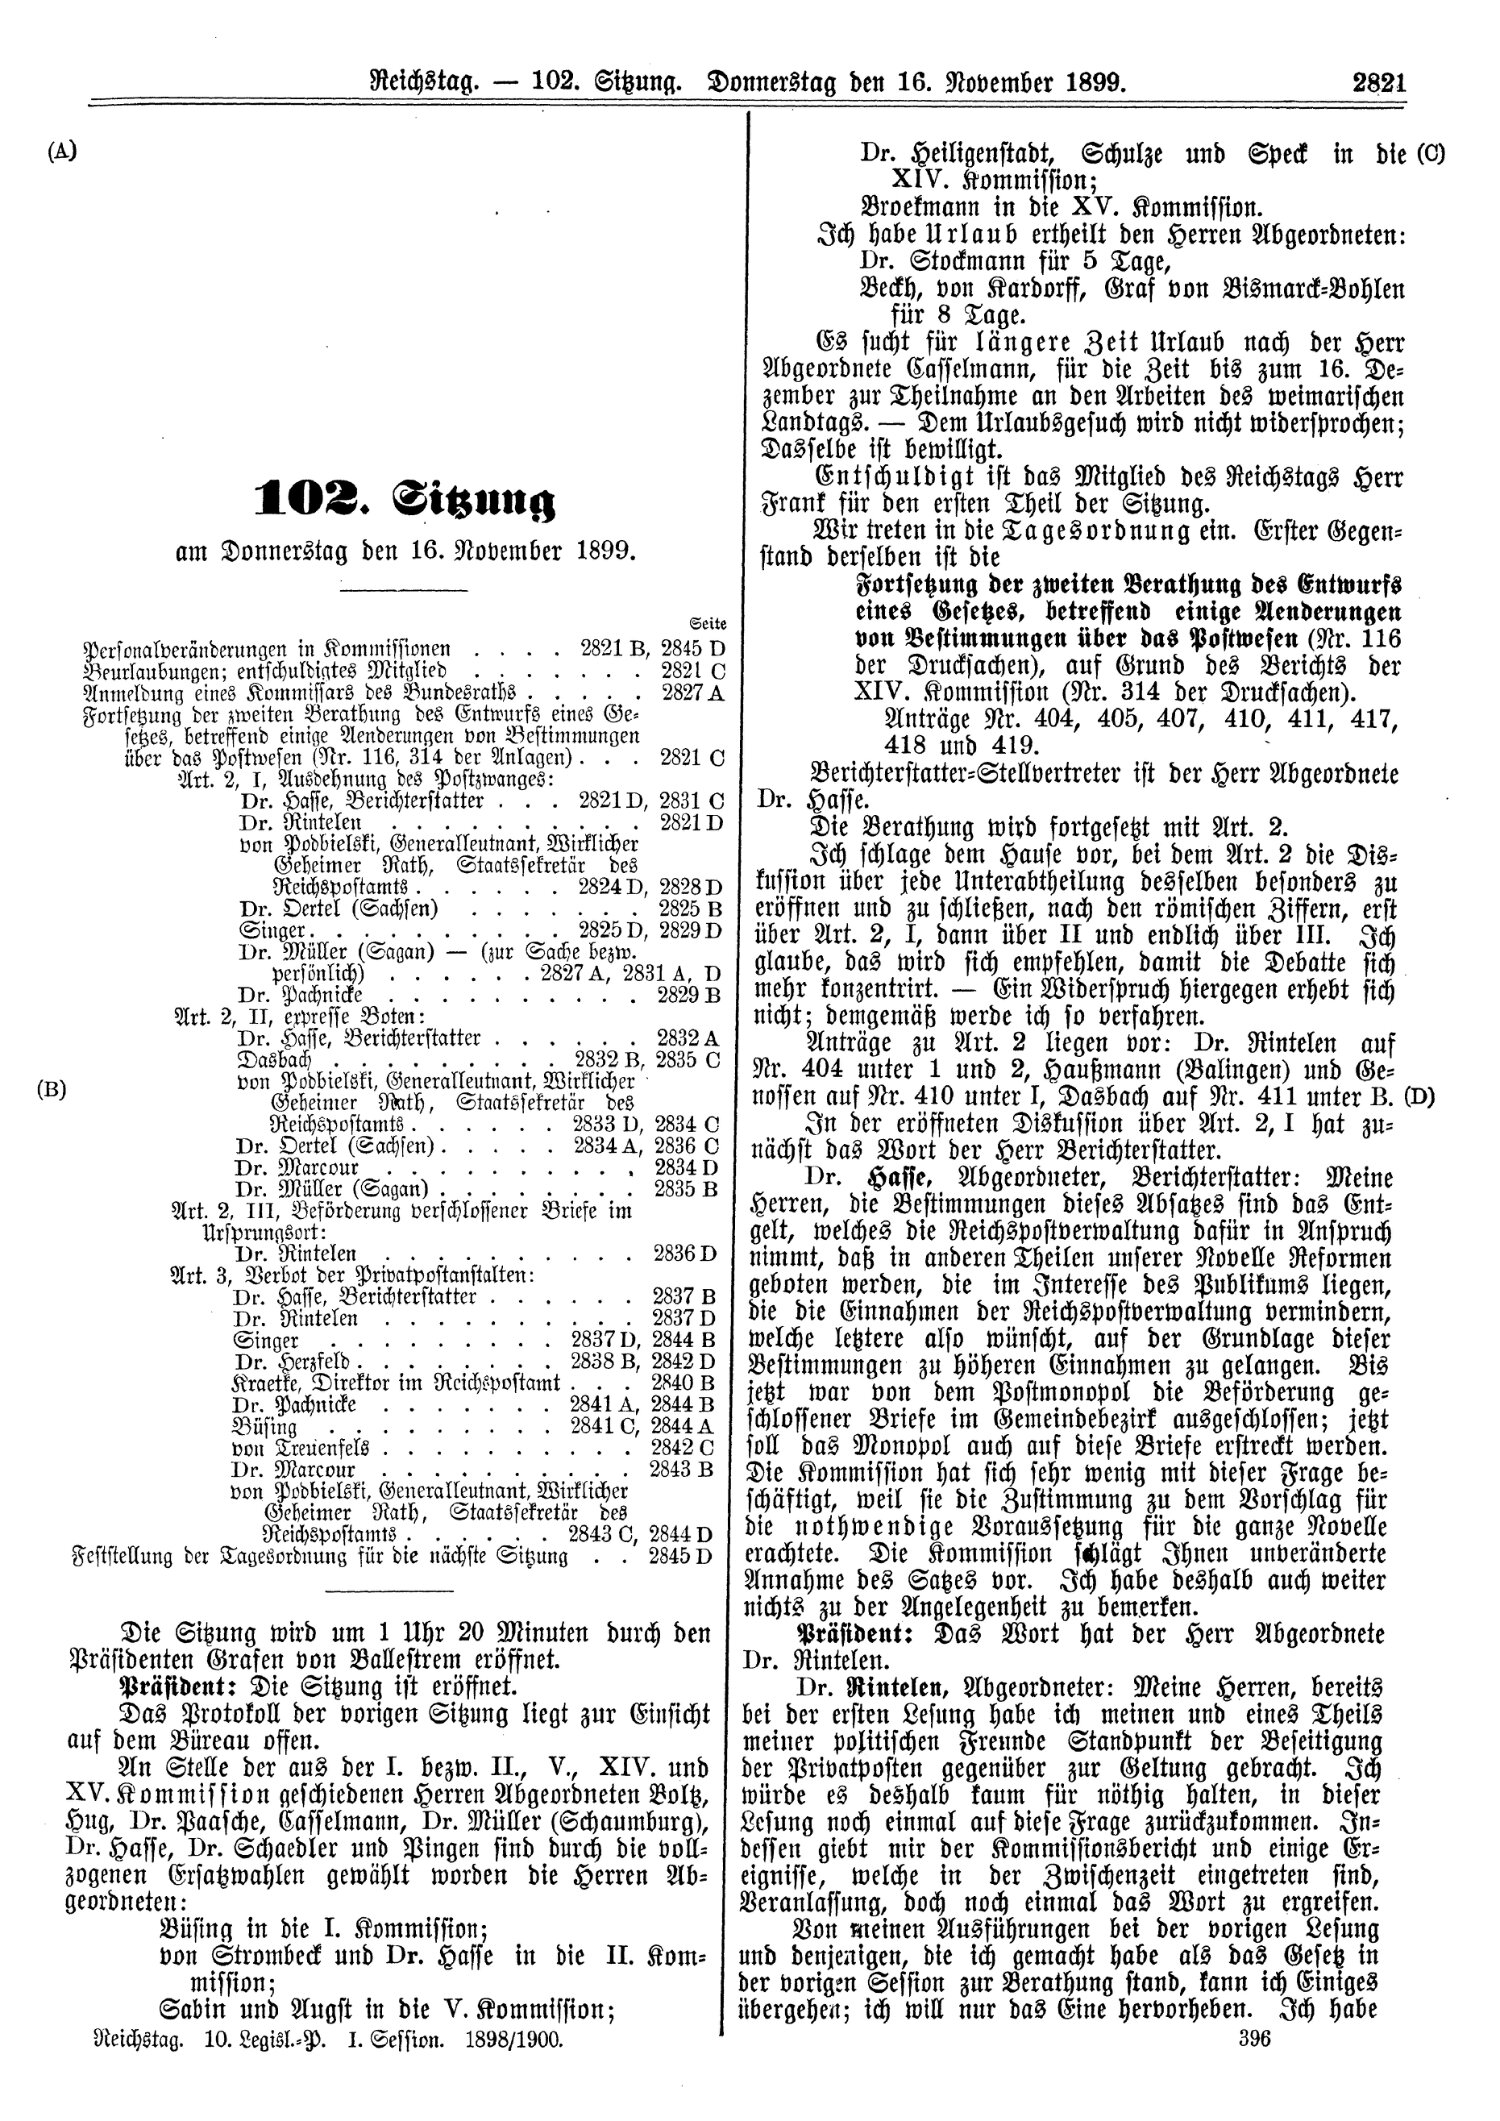 Scan of page 2821